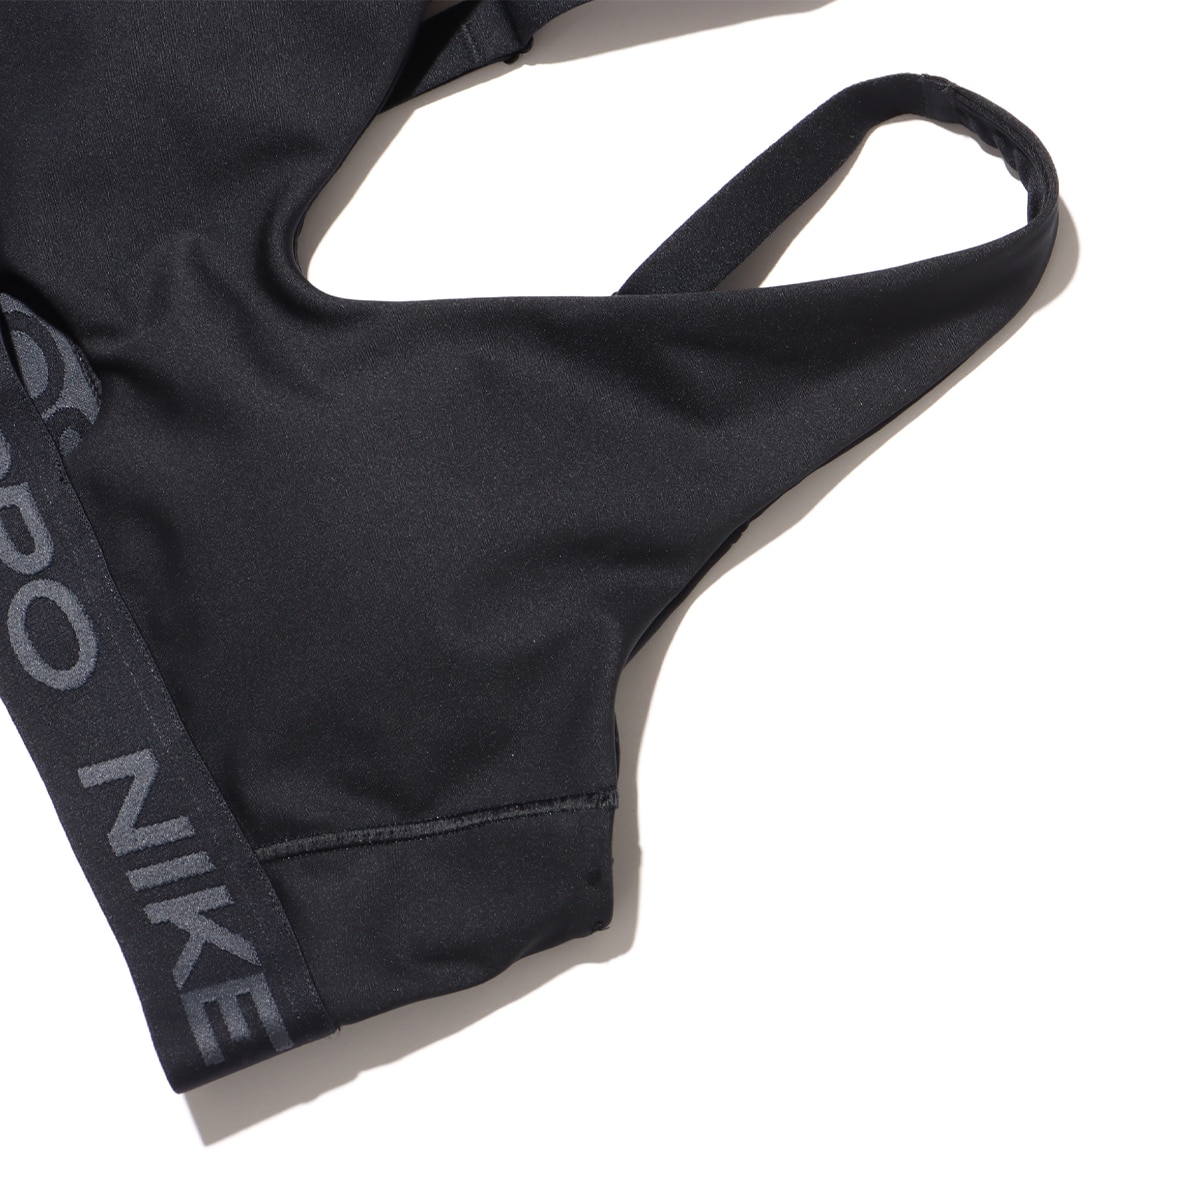 NIKE AS W NP INDY PLUNGE BRA BLACK/ANTHRACITE/WHITE 24SP-I